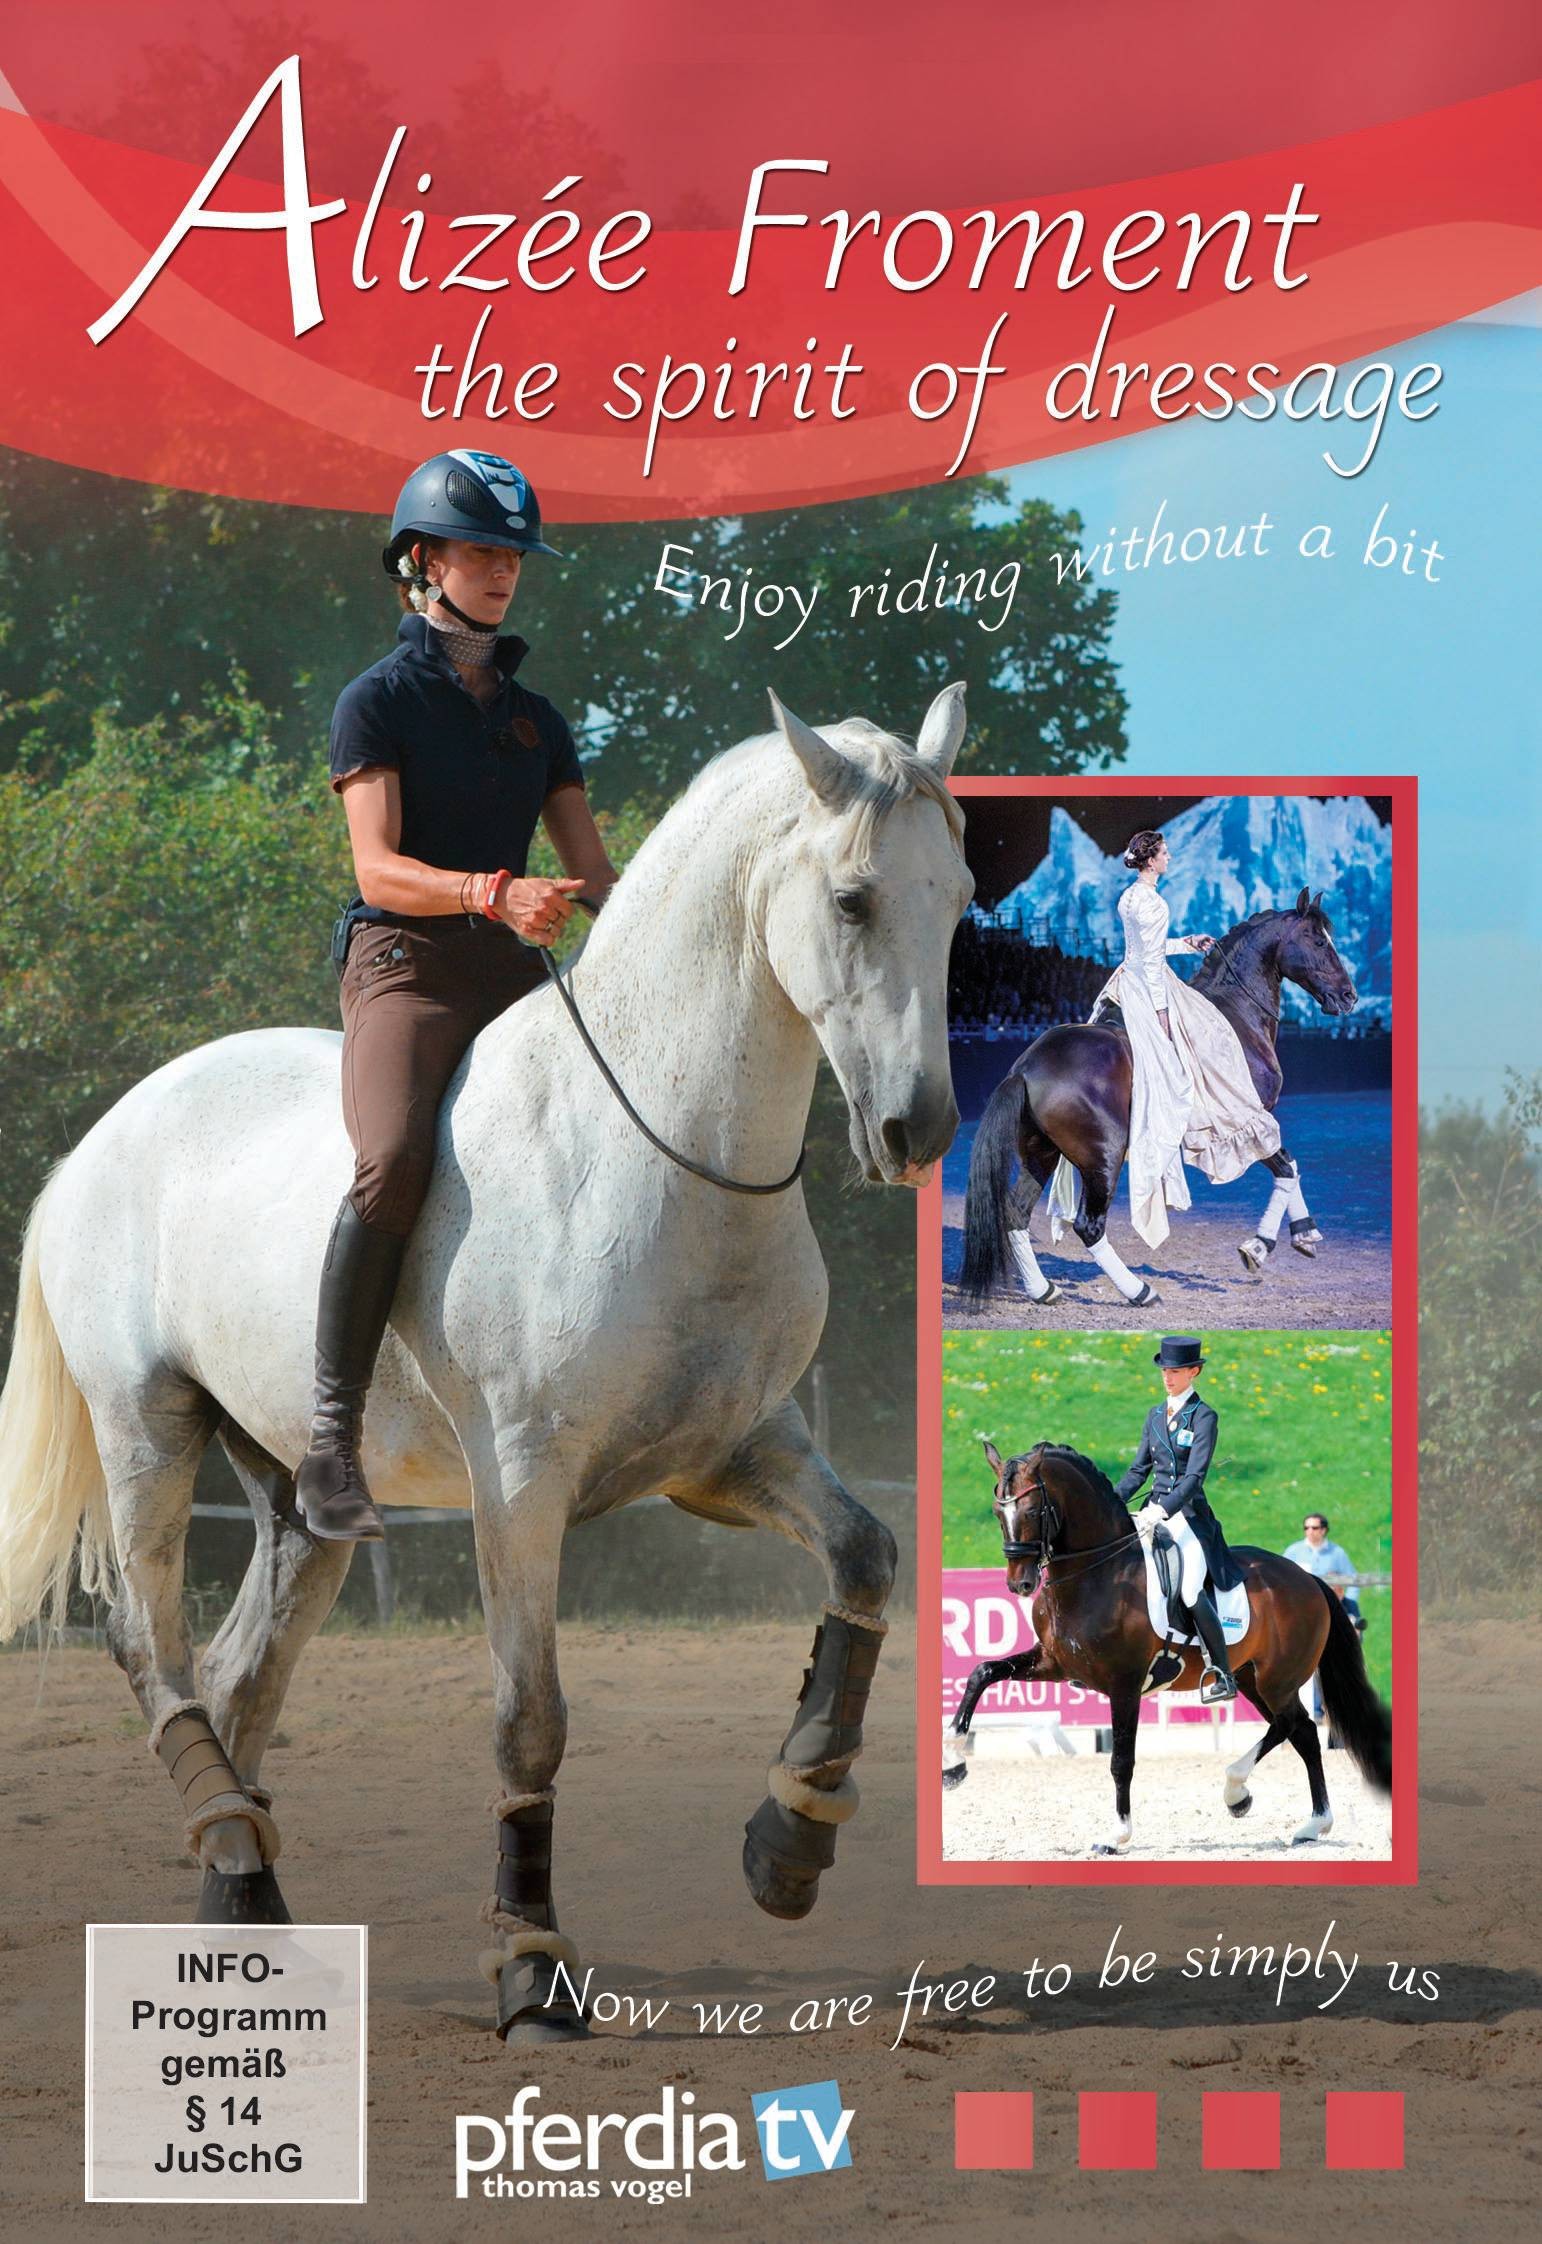 DVD Alizee Froment the Spirit of Dressage from trot-online